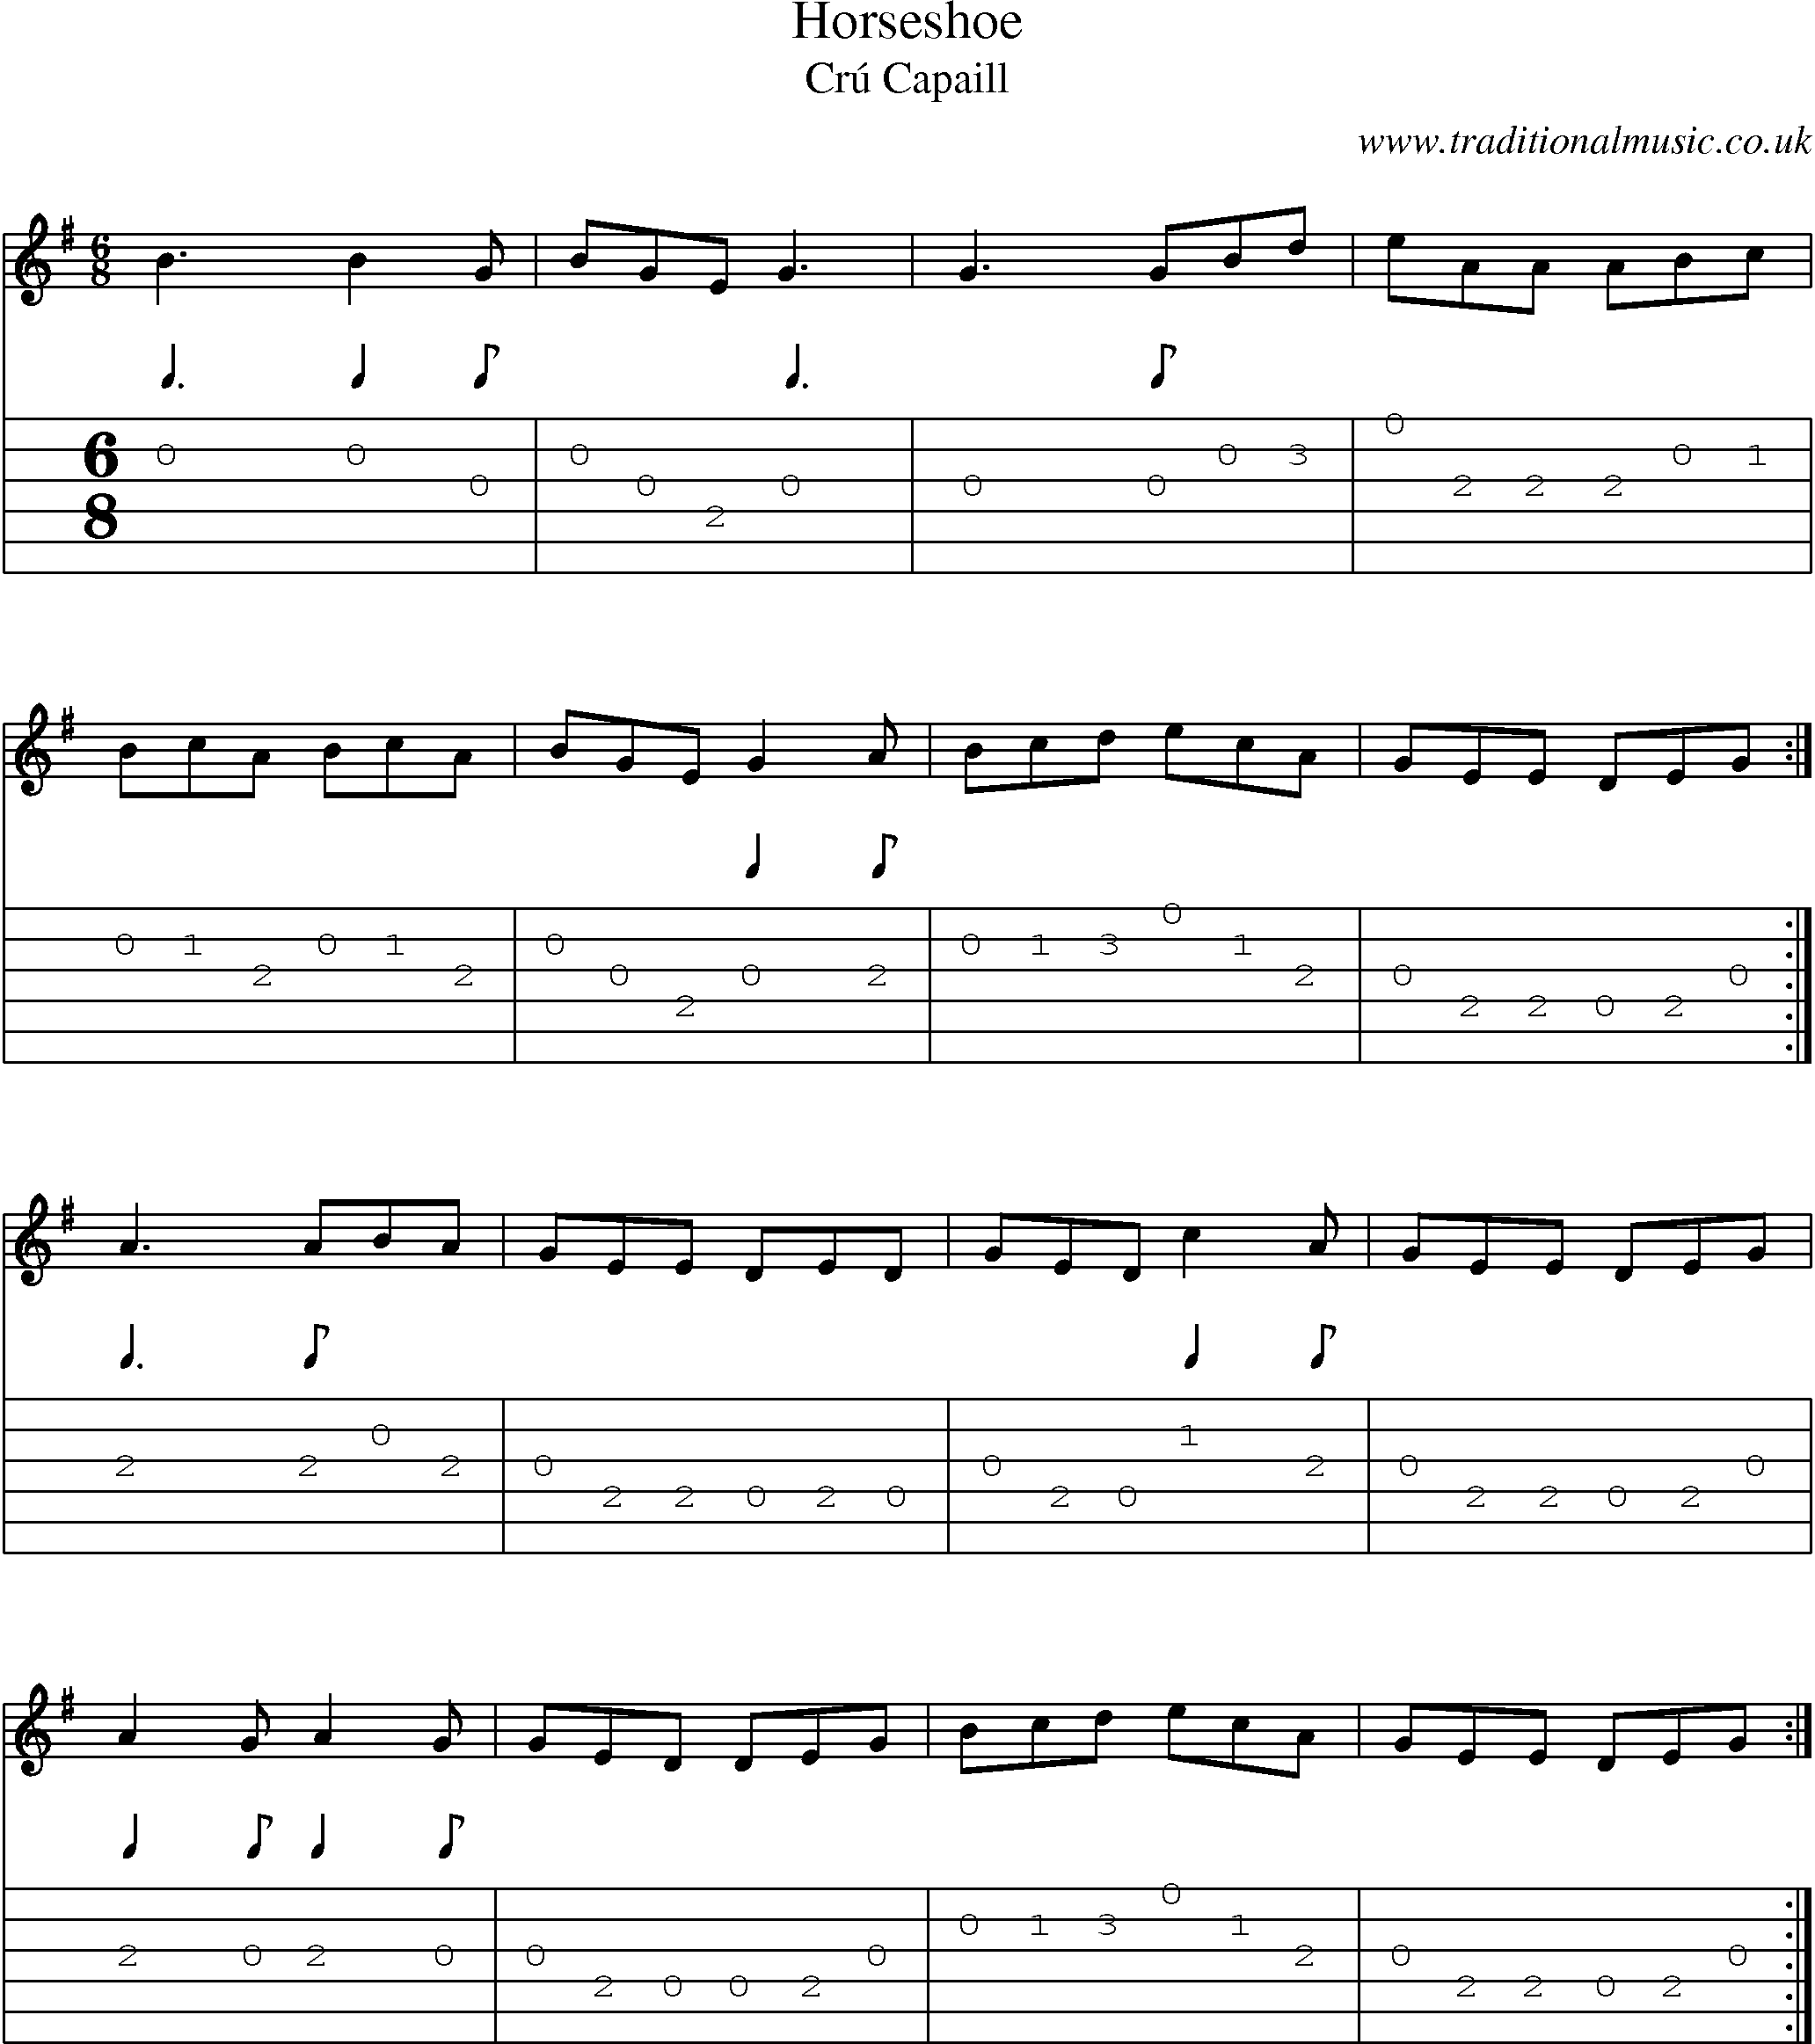 Music Score and Guitar Tabs for Horseshoe